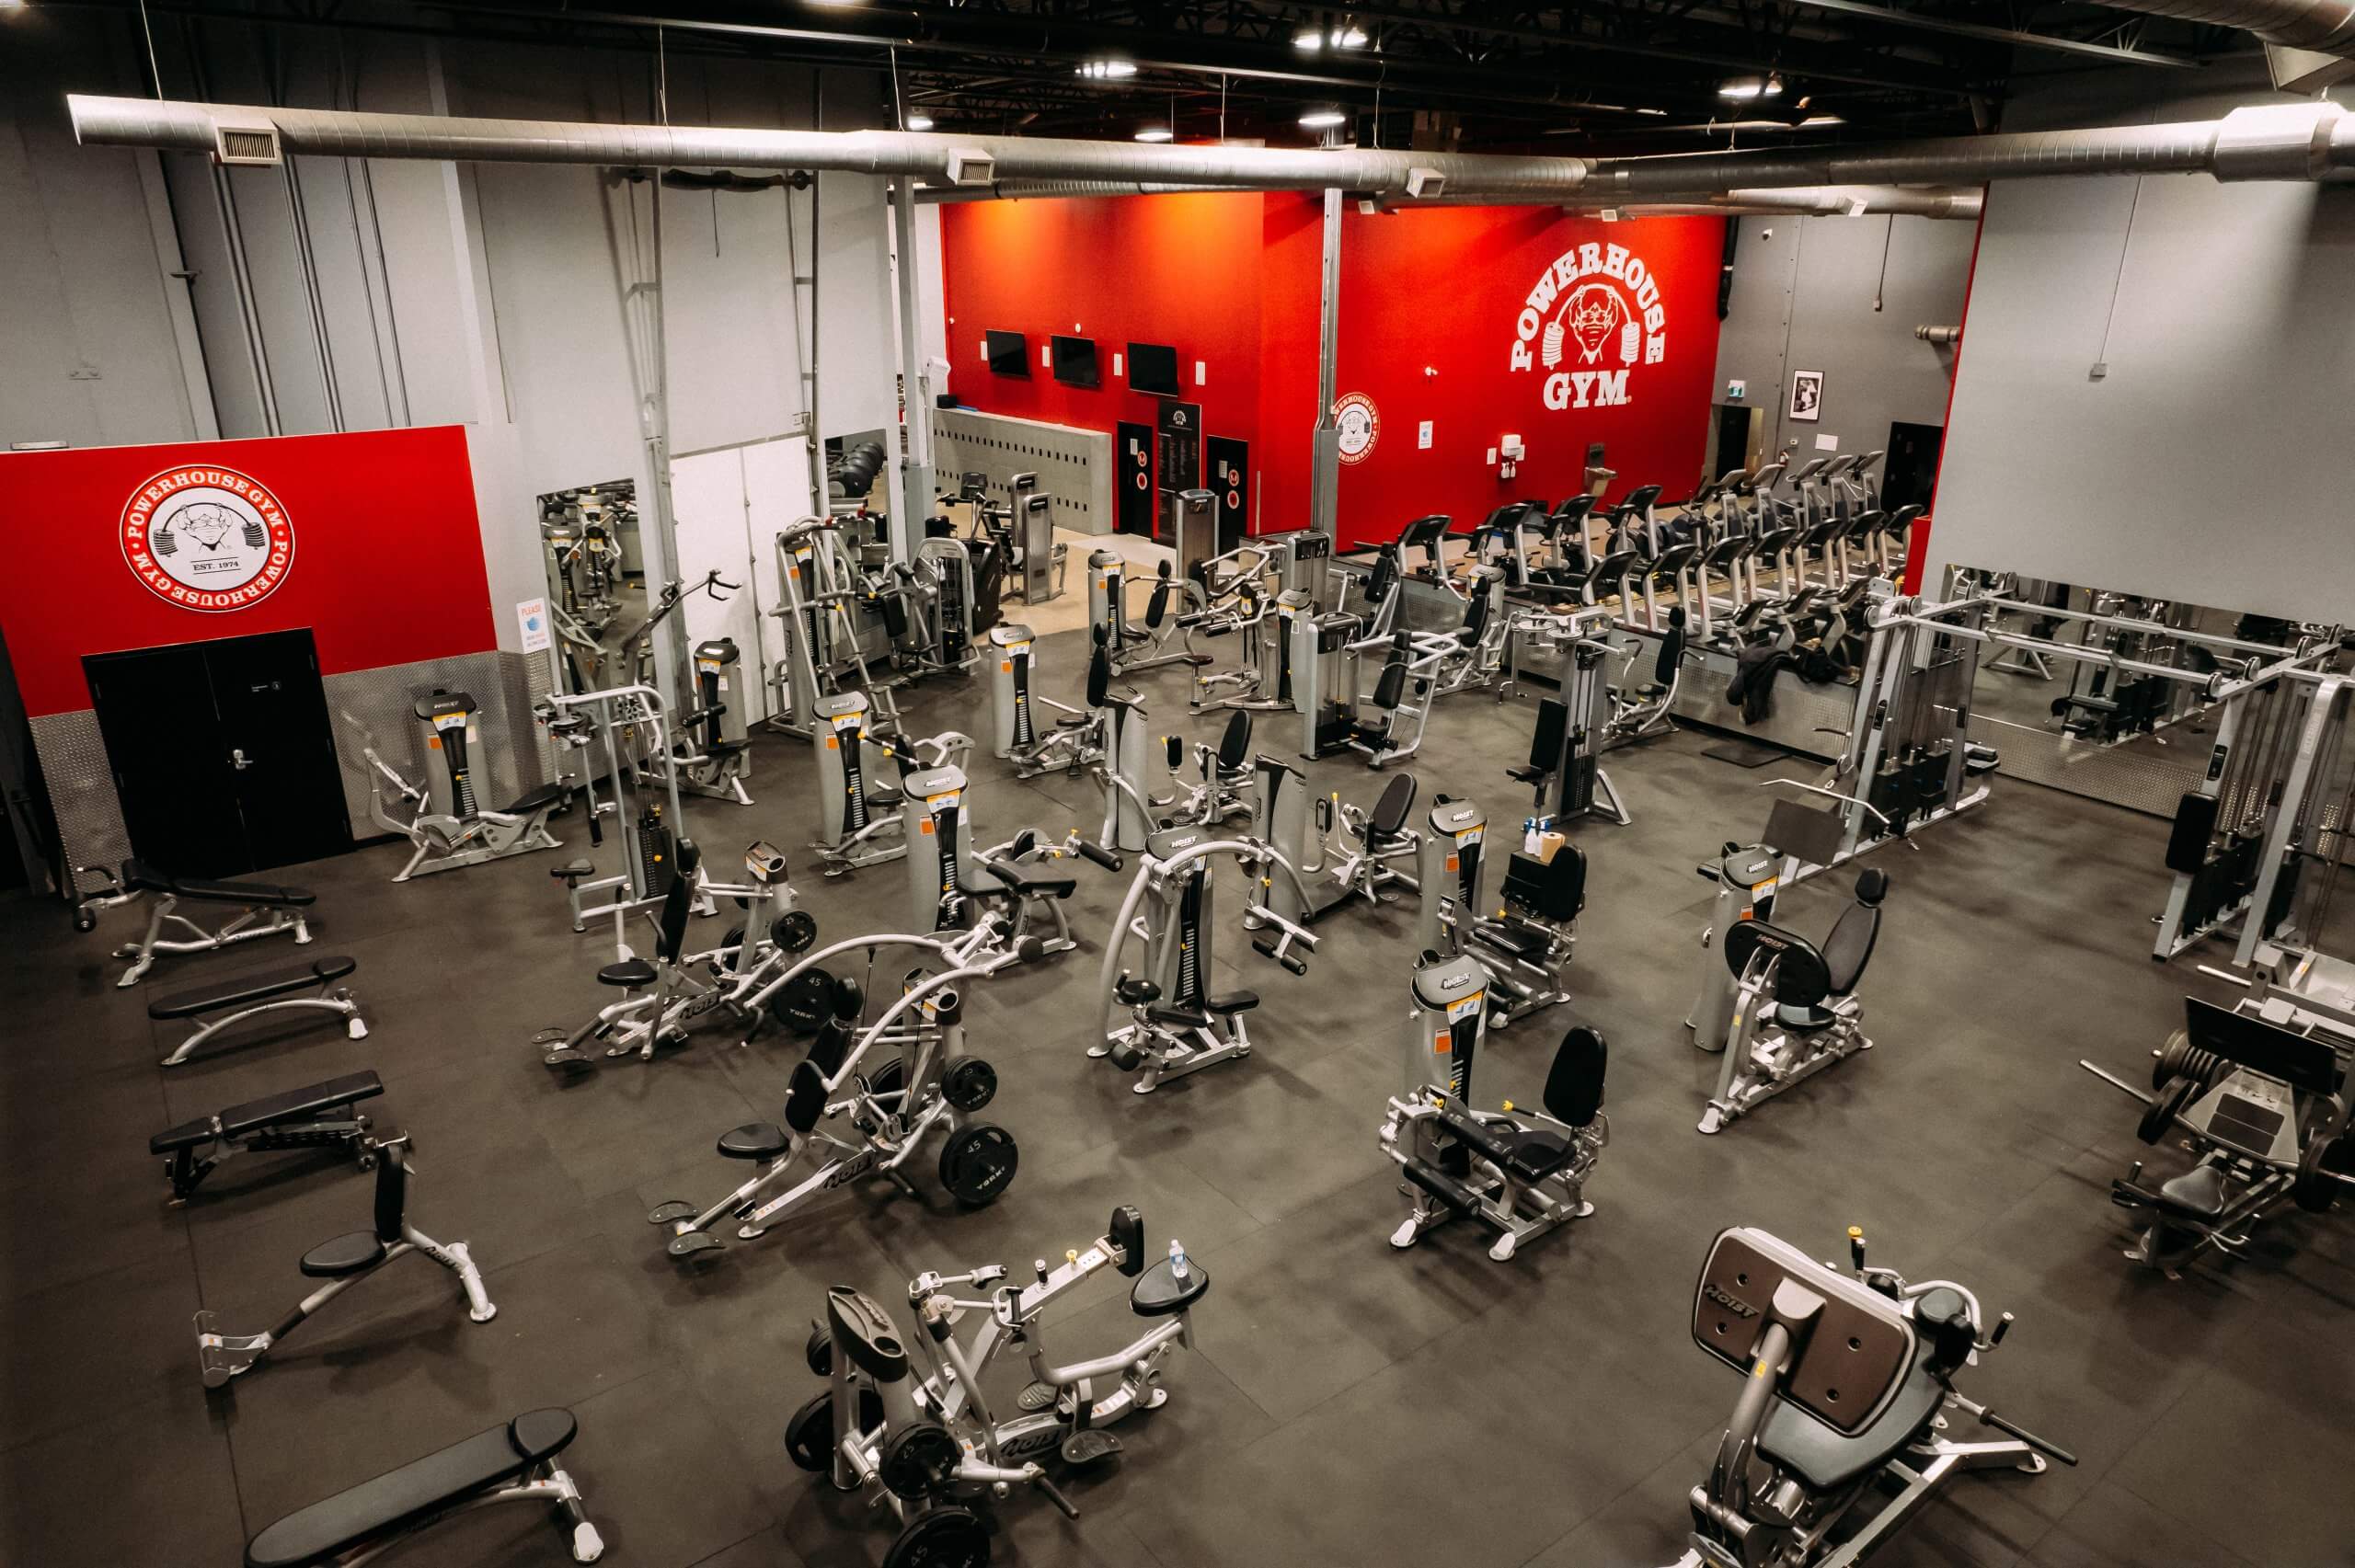 An Thumbnail Image of the Mississauga, Canada Powerhouse Gym Location